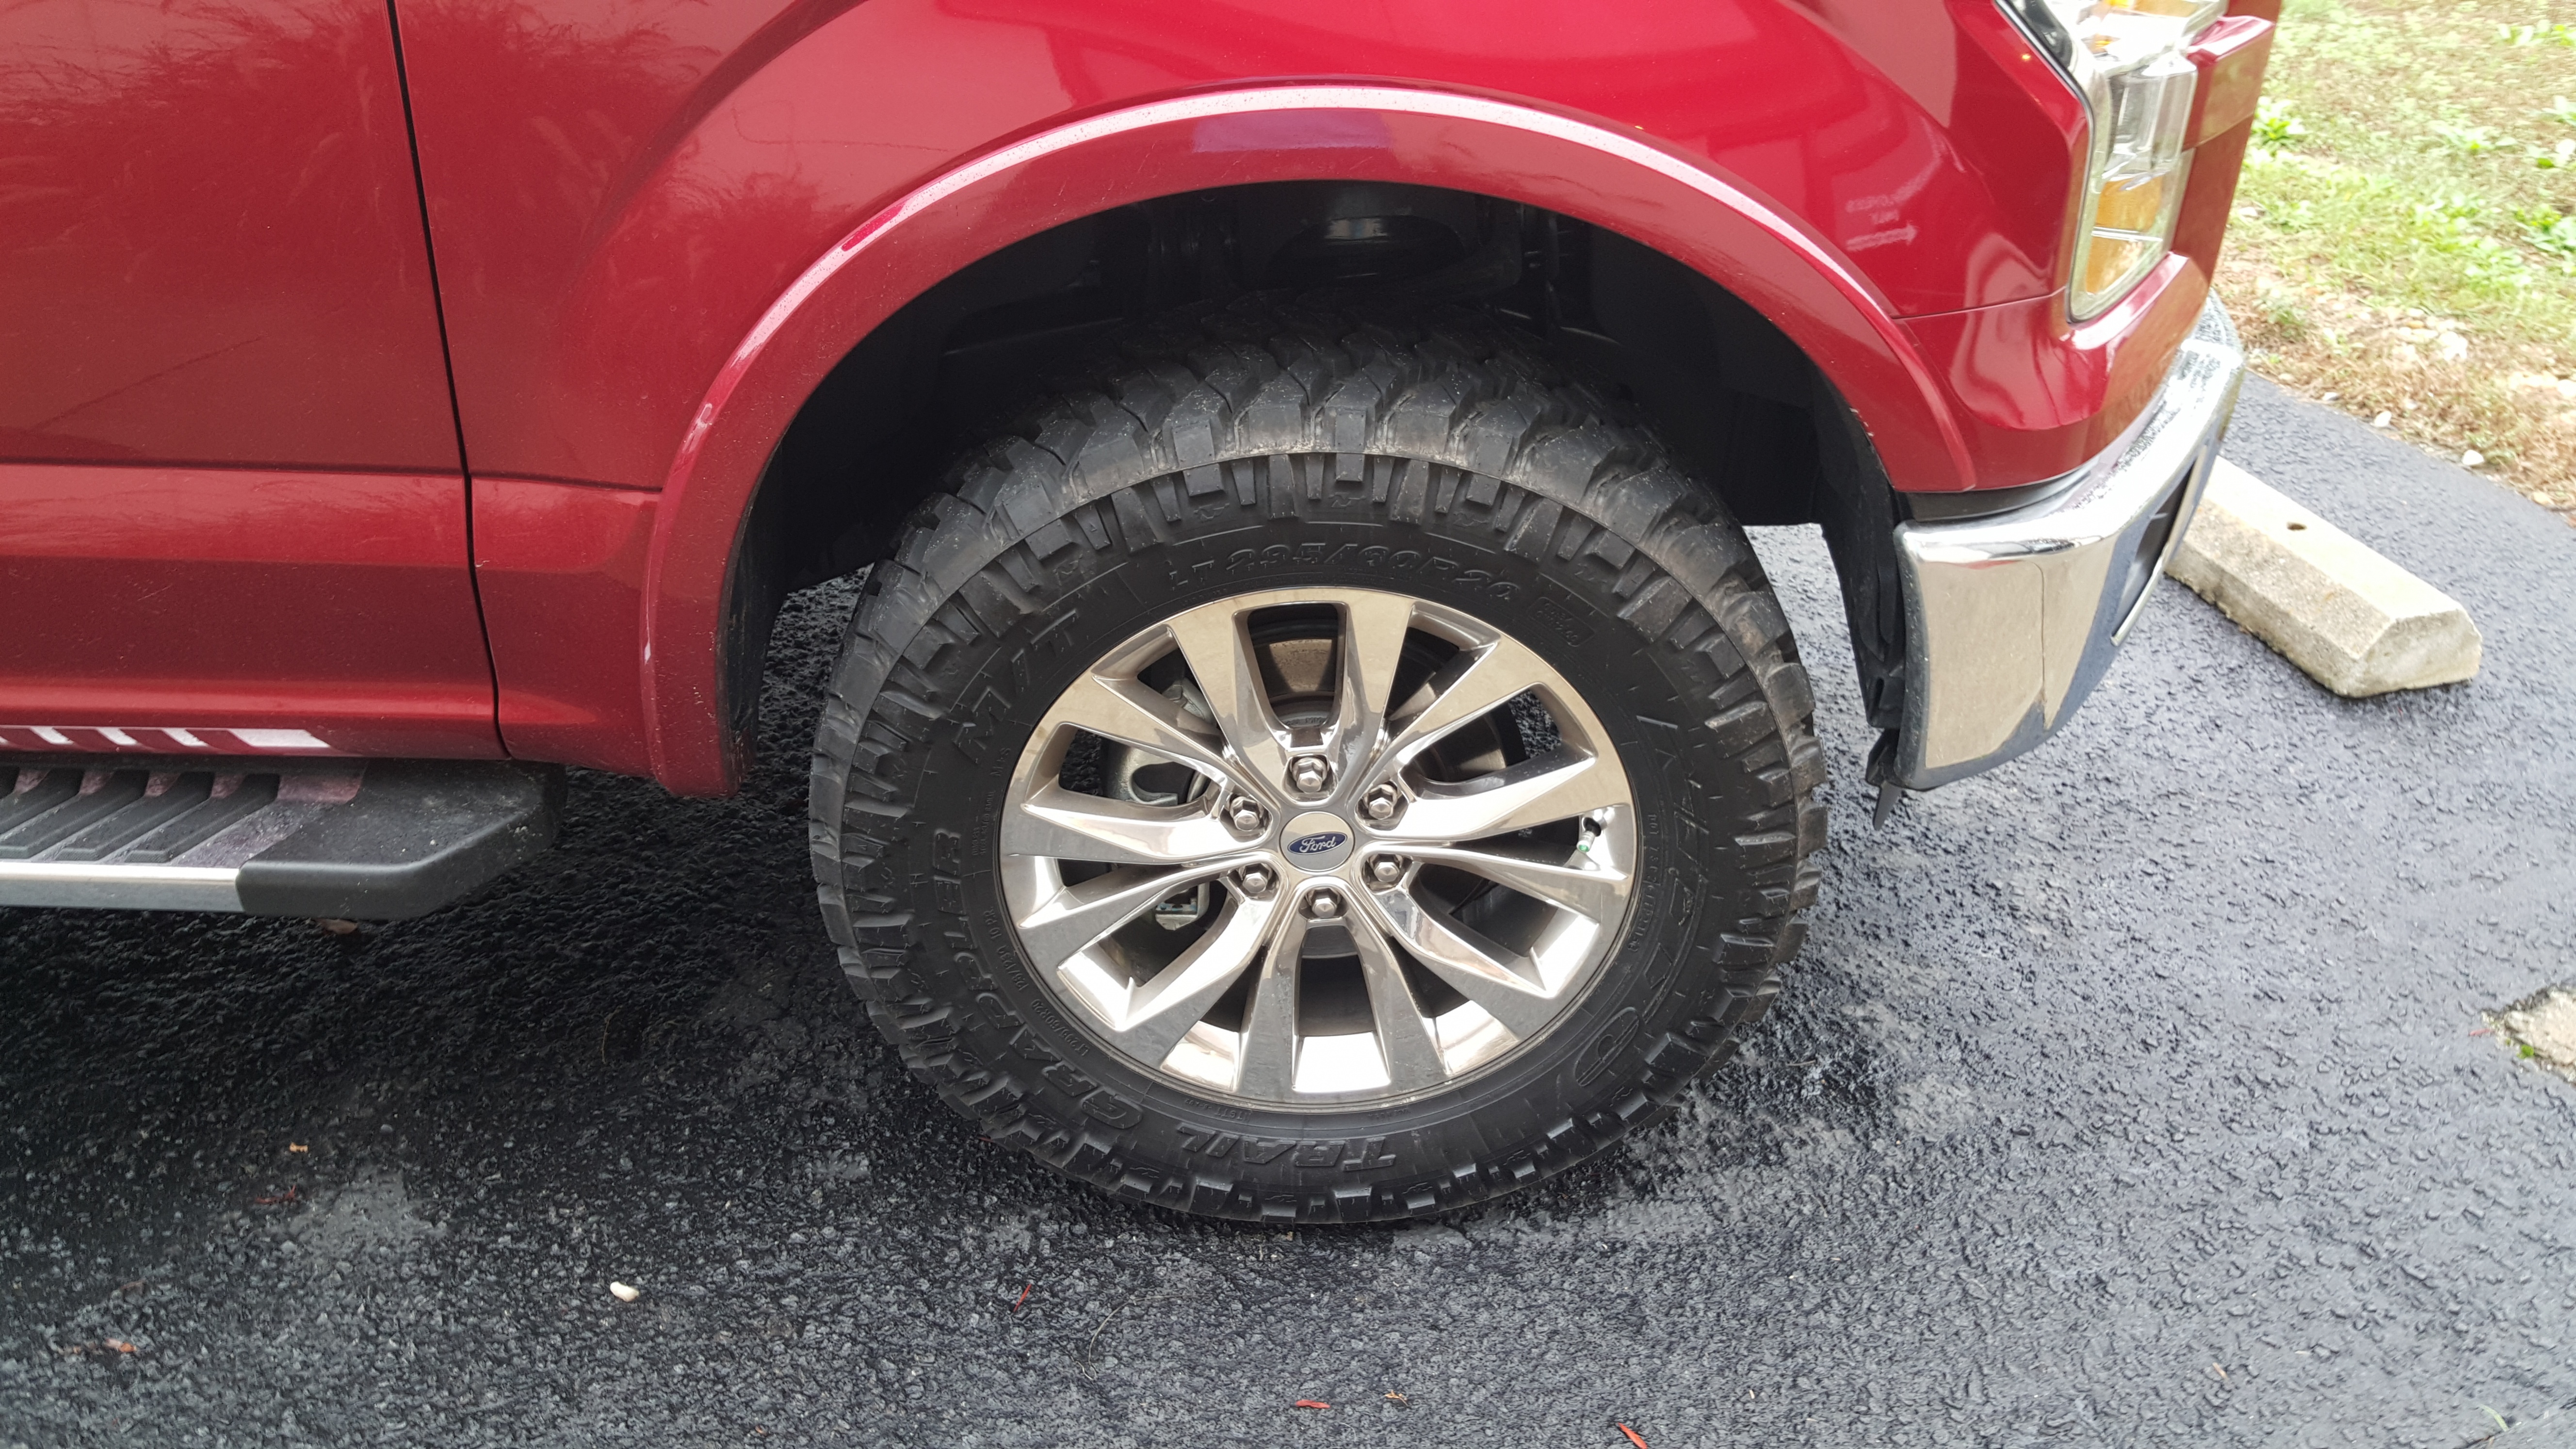 Biggest Tire On Stock F150 20 Rim - Stocks Walls What's The Biggest Tire For A Stock F150